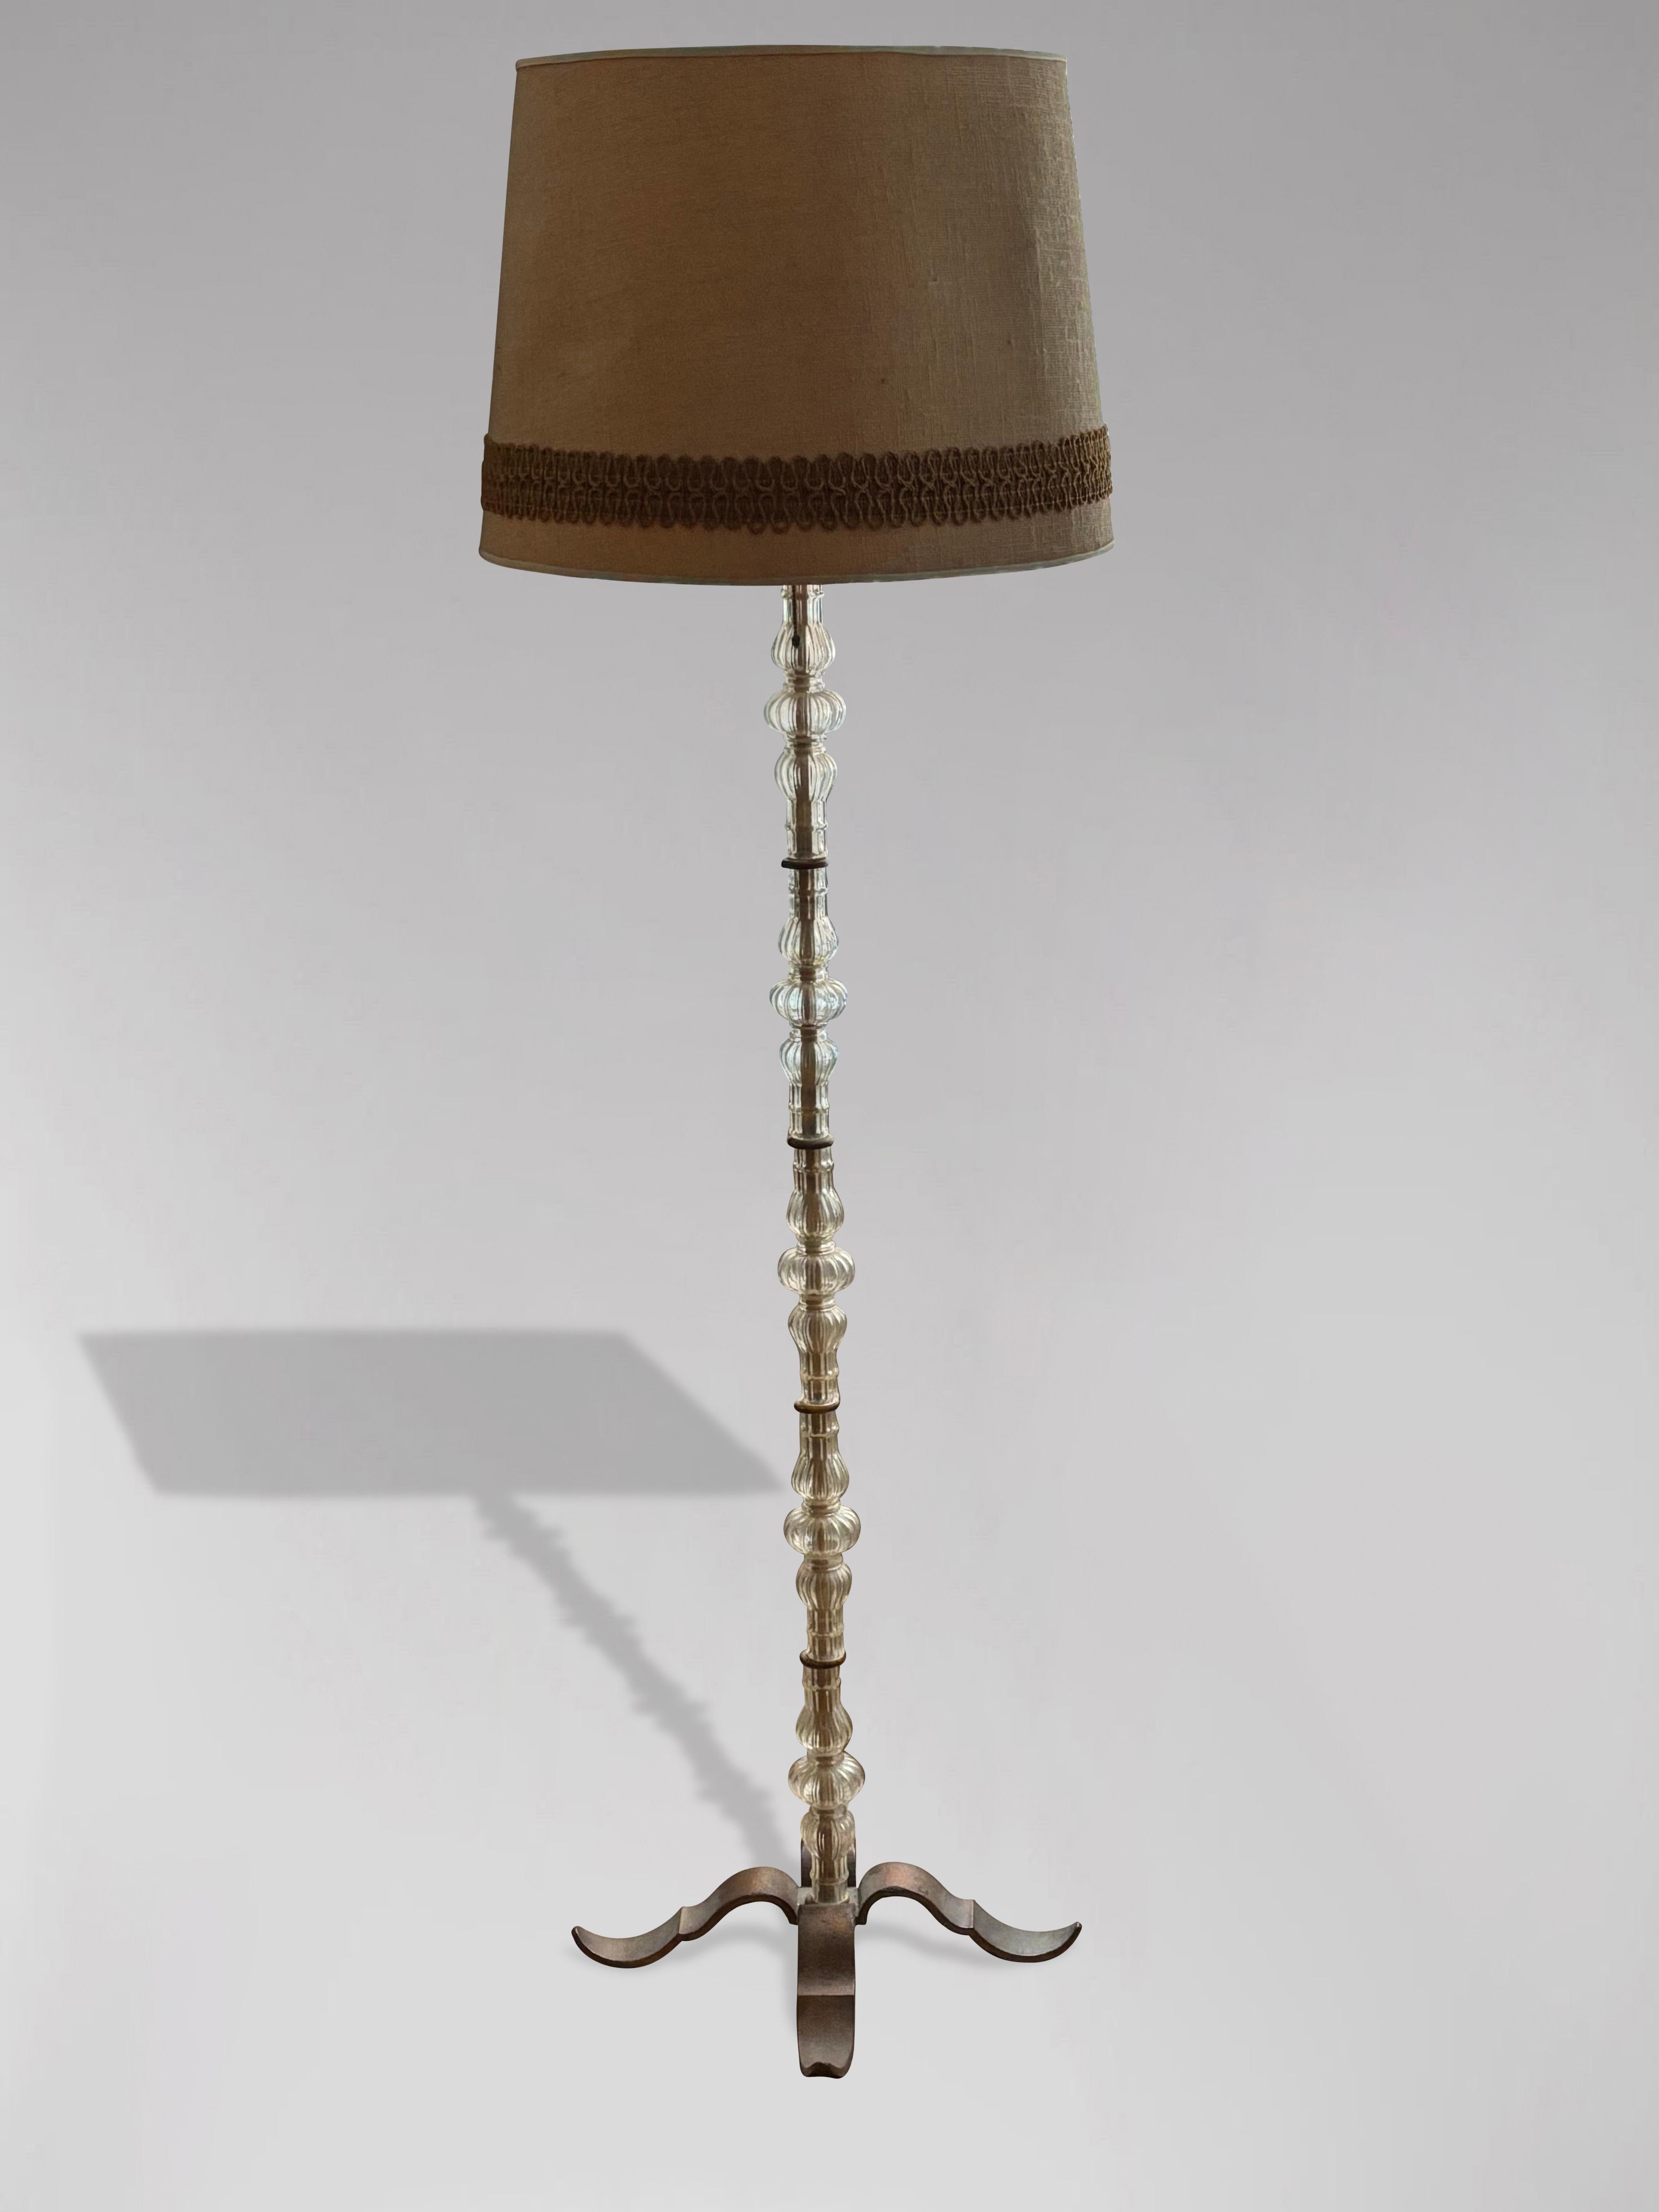 1960s French Glass & Brass Floor Lamp For Sale 2